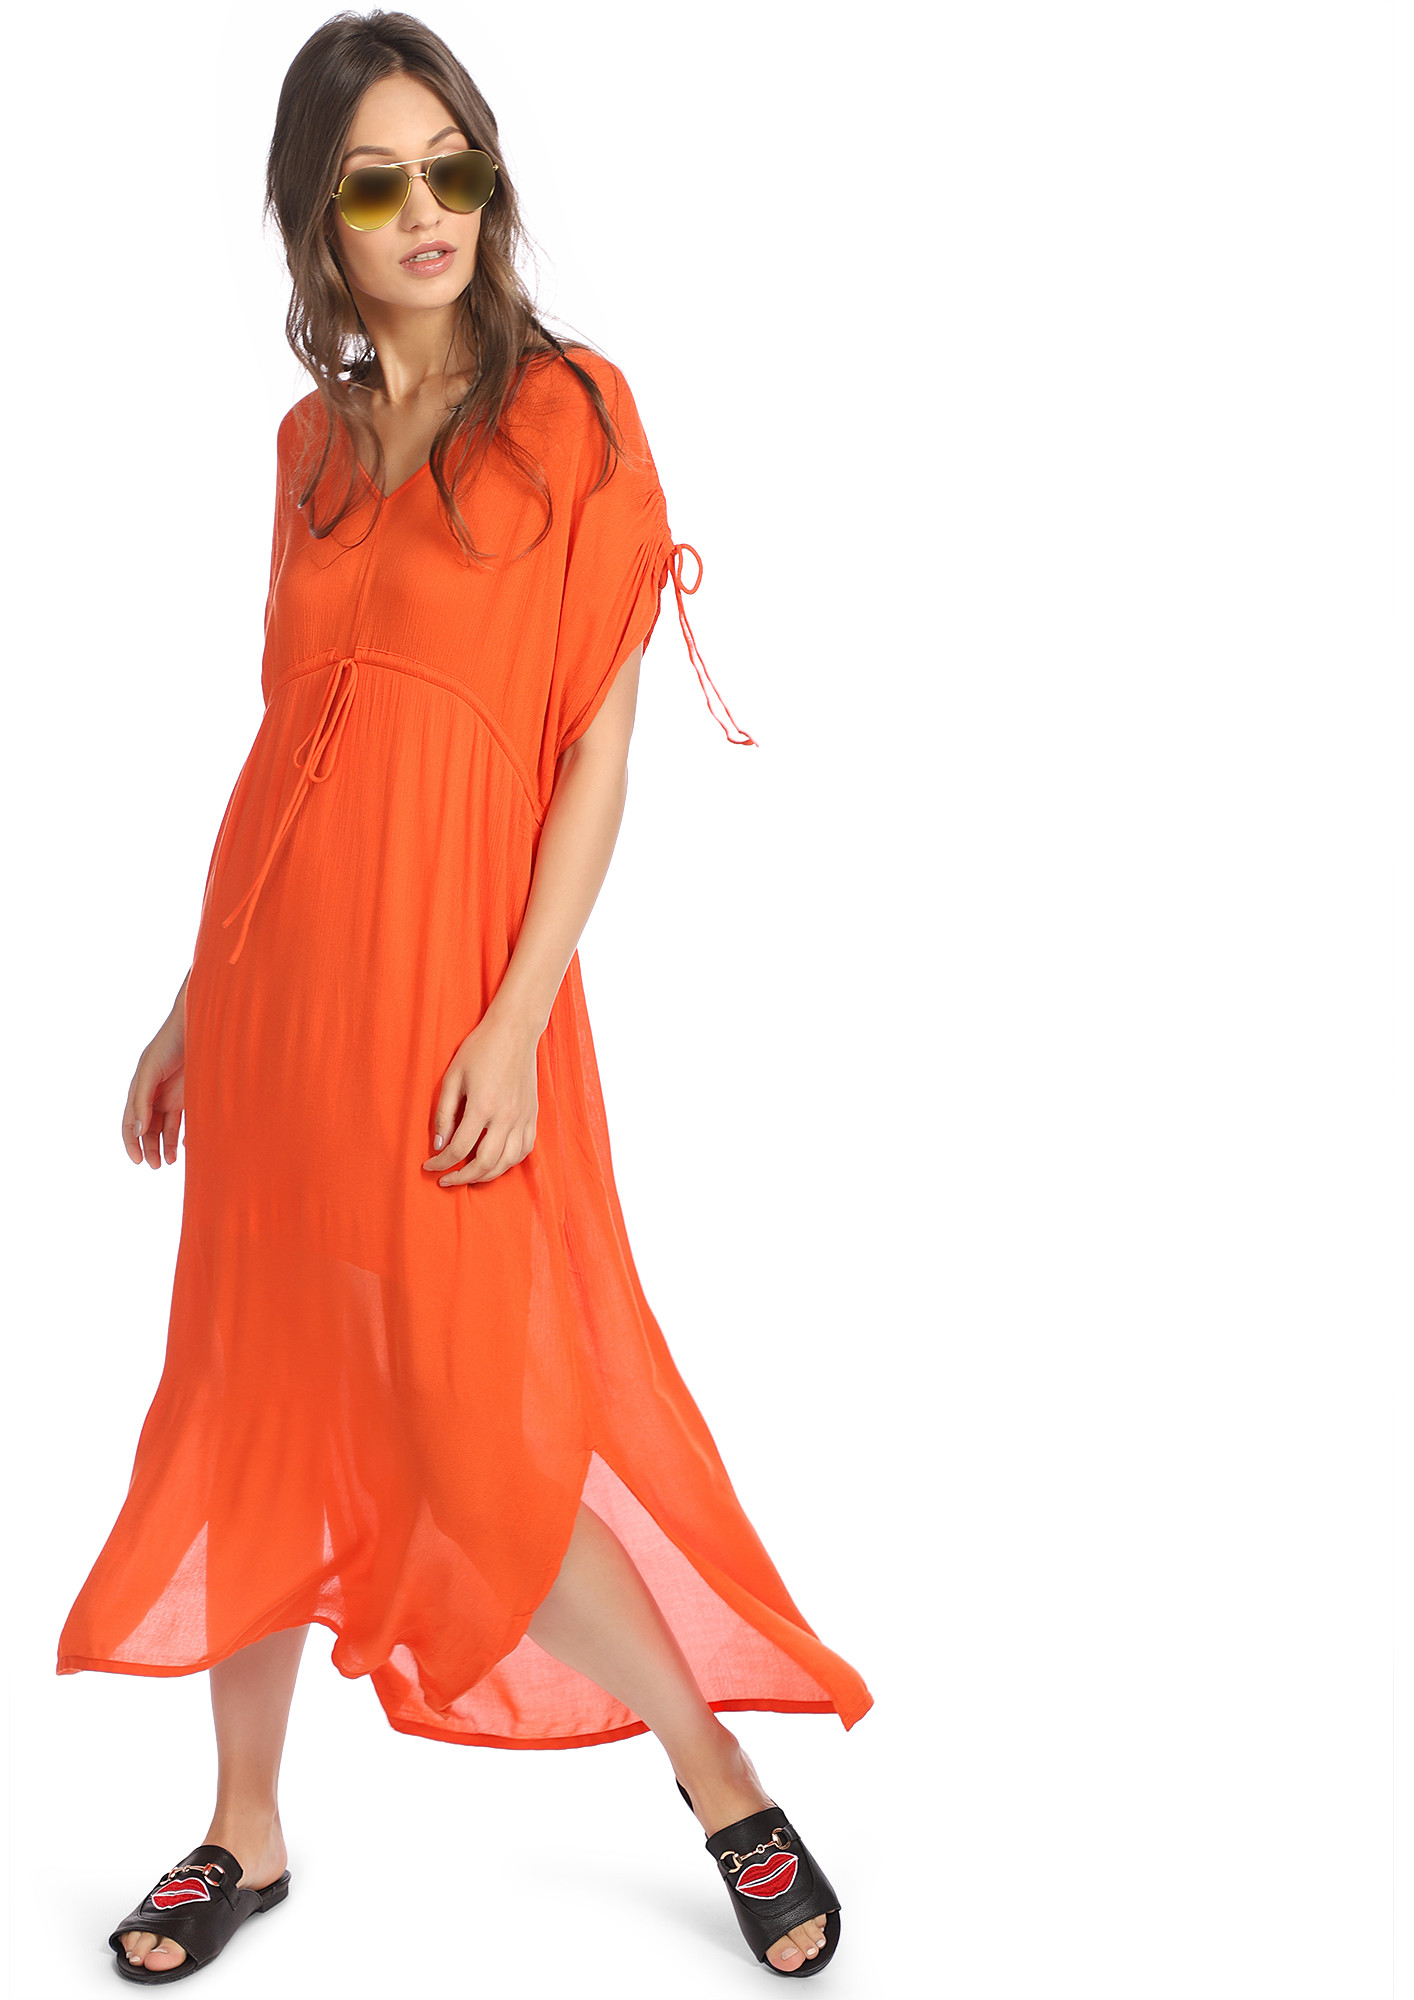 LET'S DO BEACHING TOGETHER TANGERINE MAXI DRESS